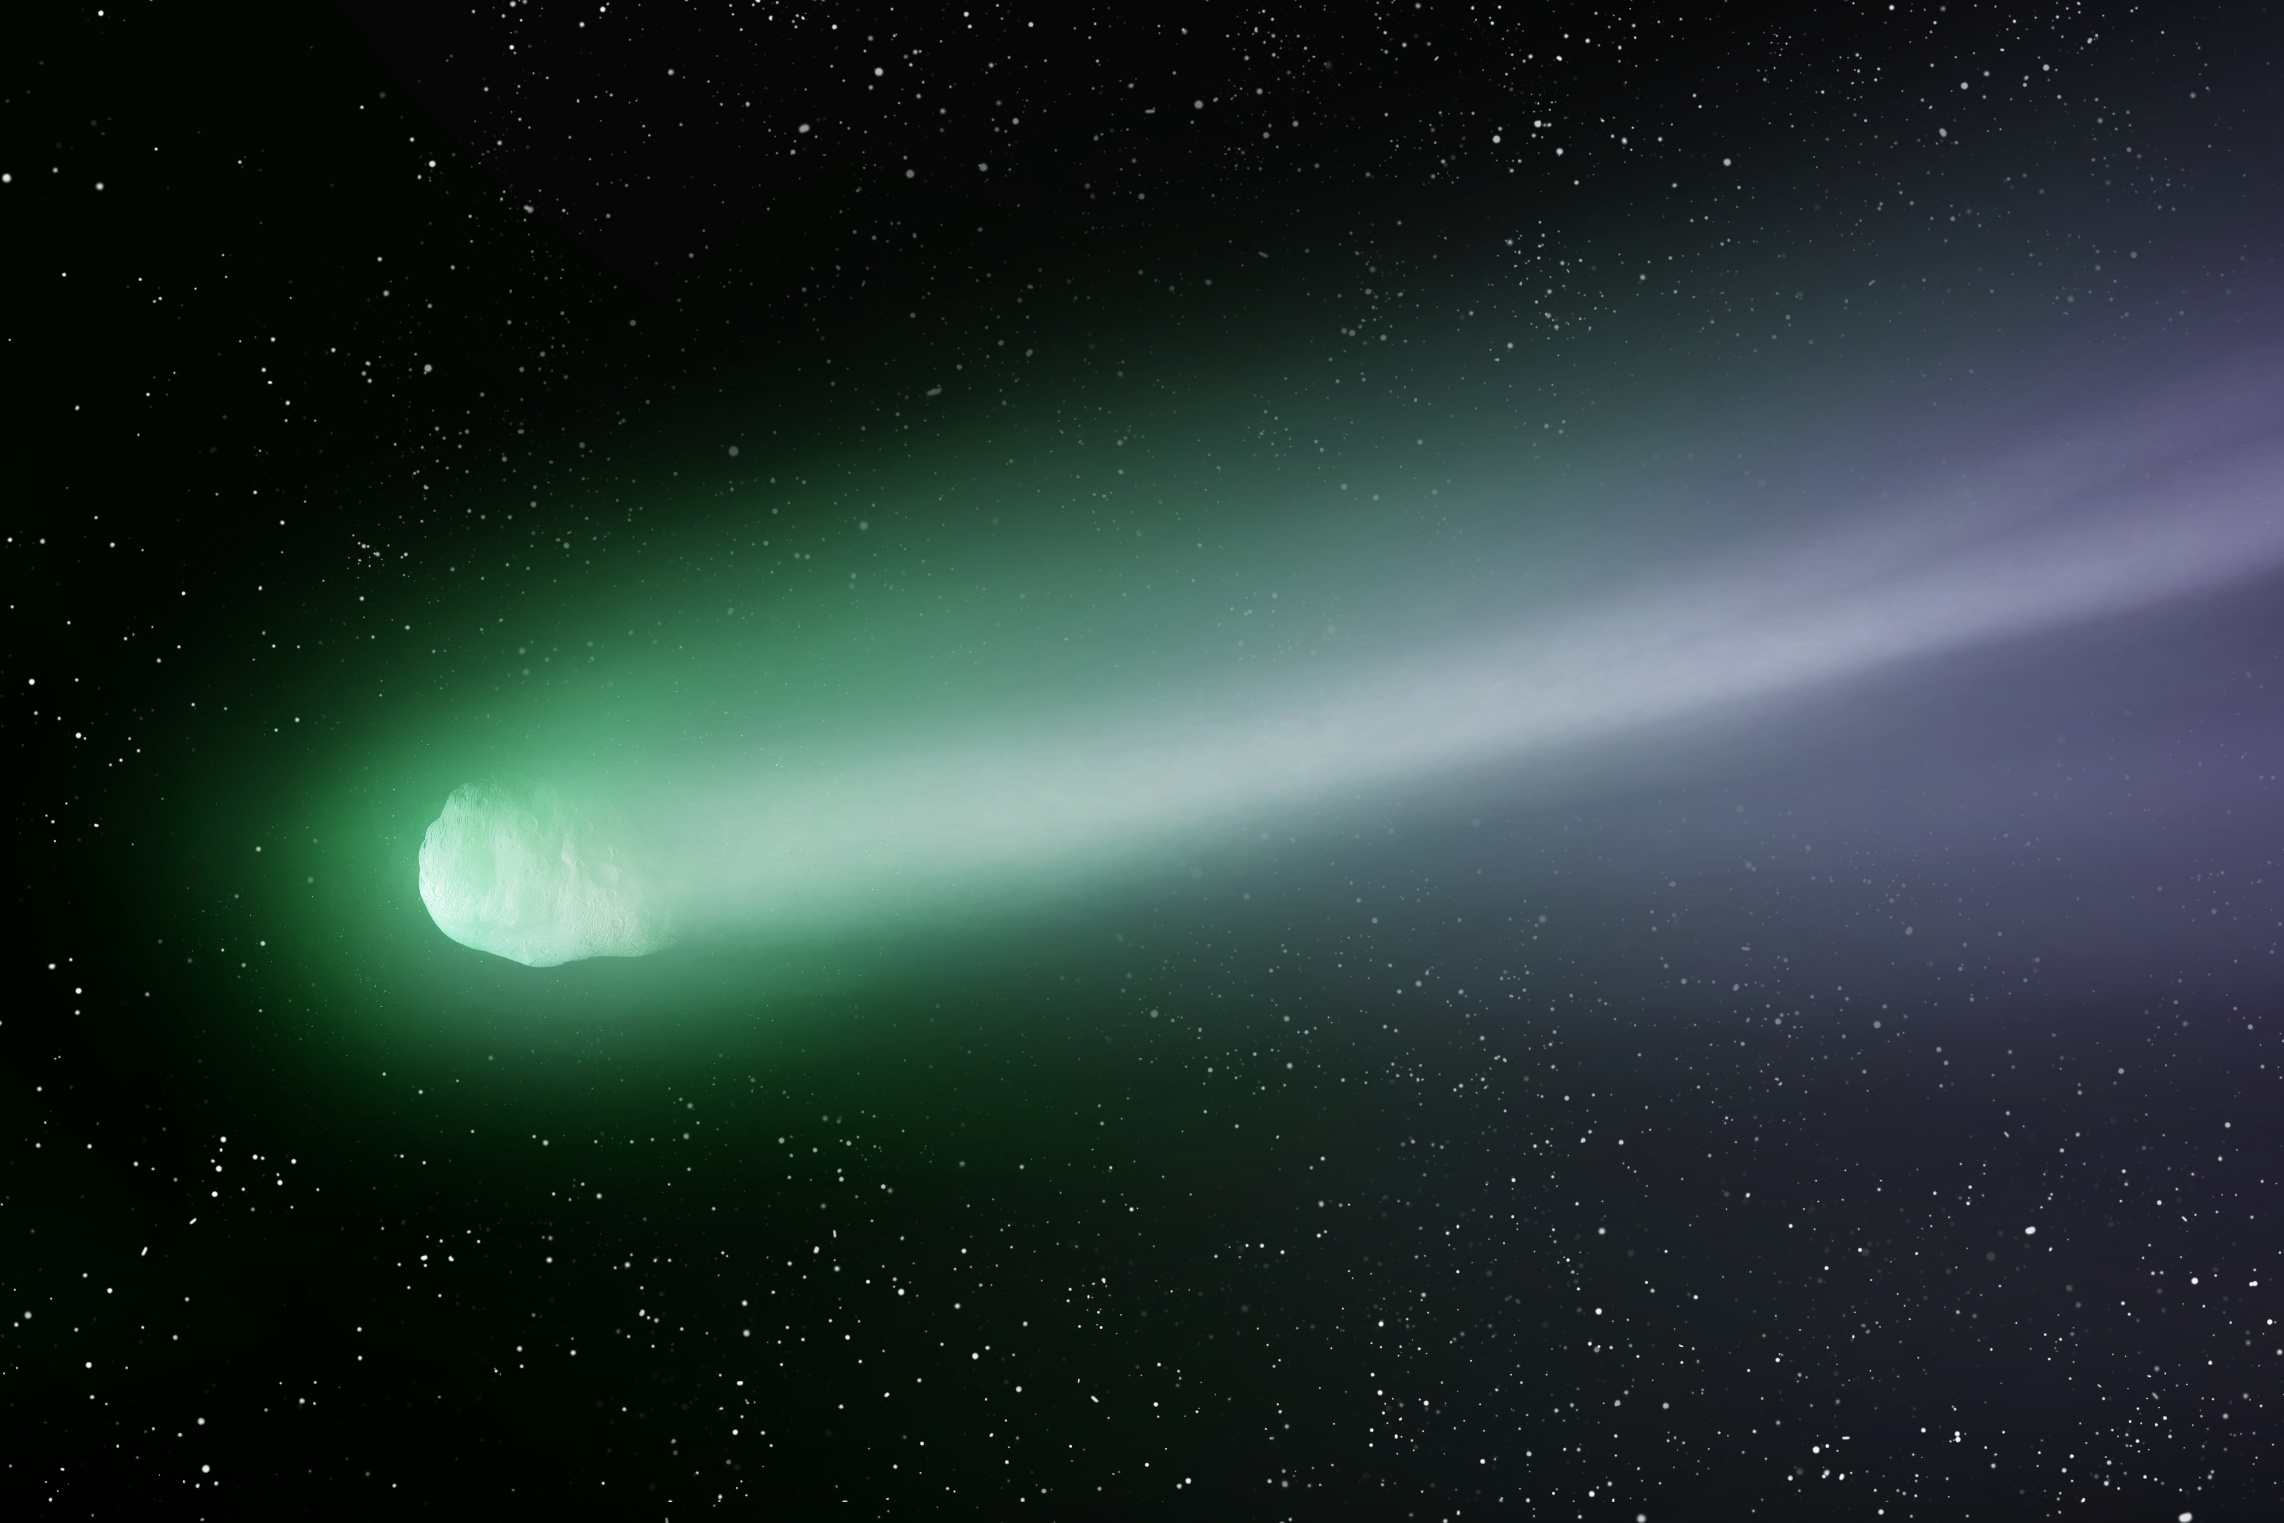 How and When to See the Rare Green Comet Live Online